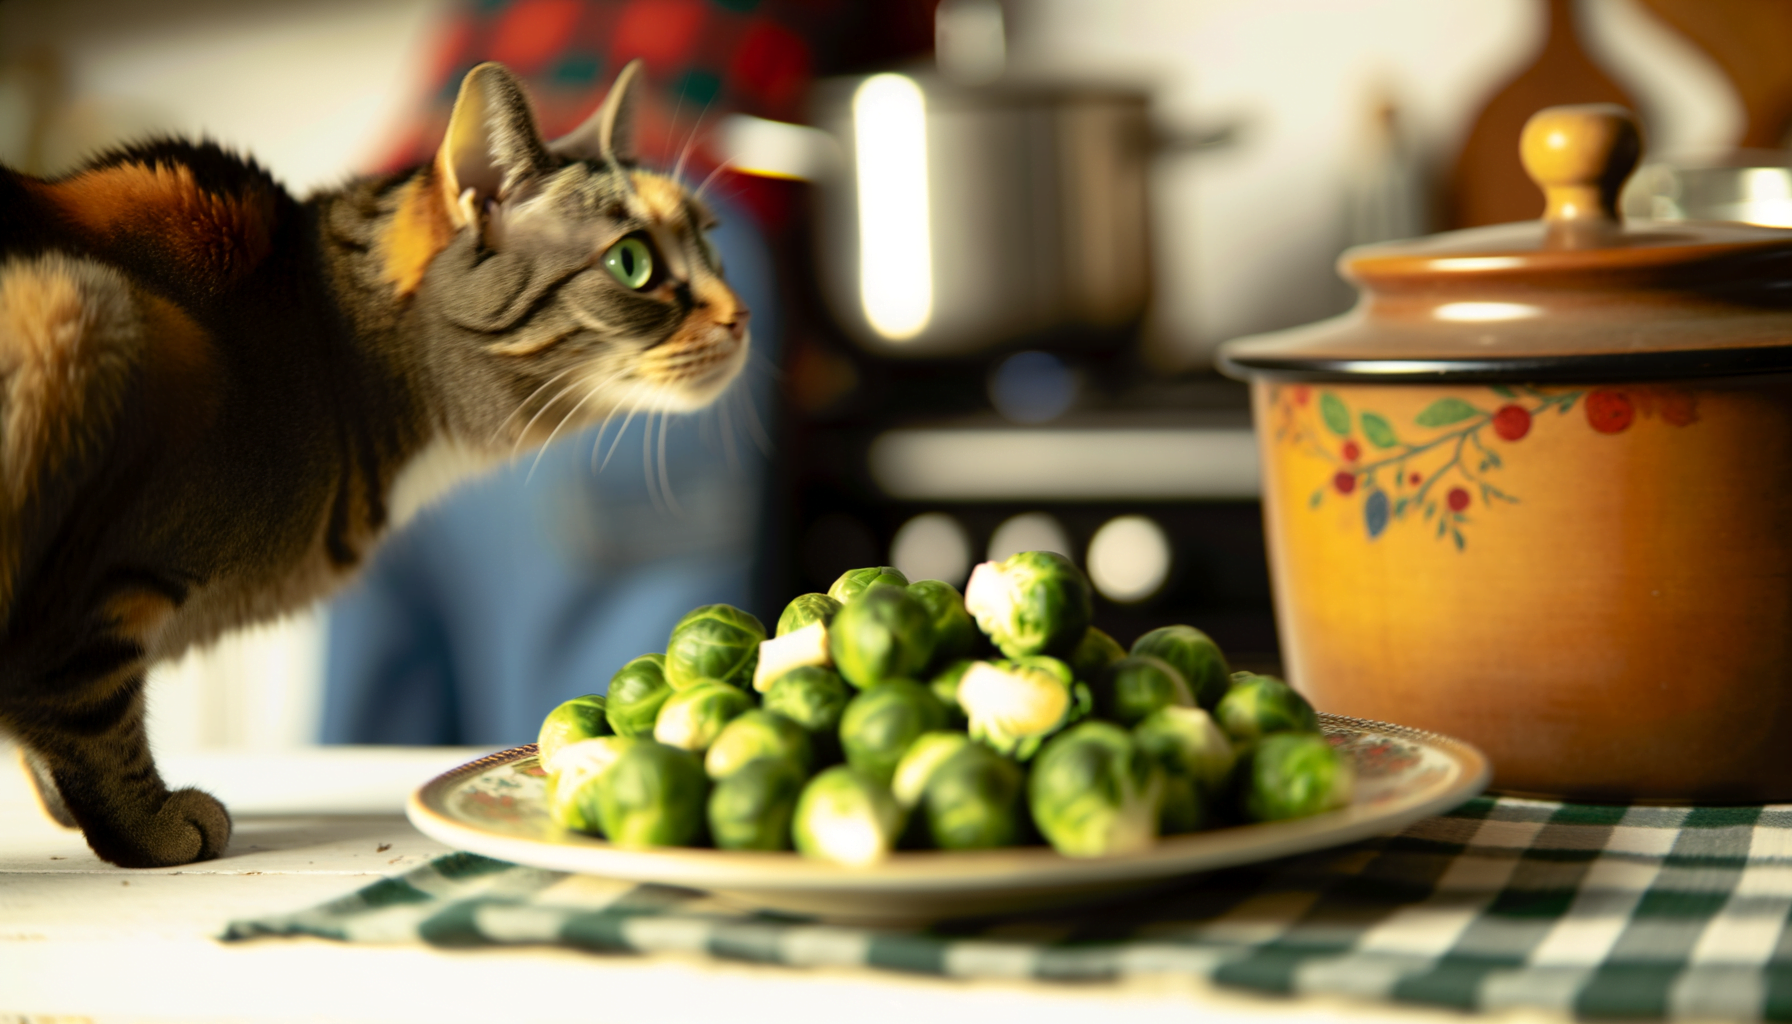 "The Feline Diet: Unmasking the Mystery of Cats and Brussel Sprouts"